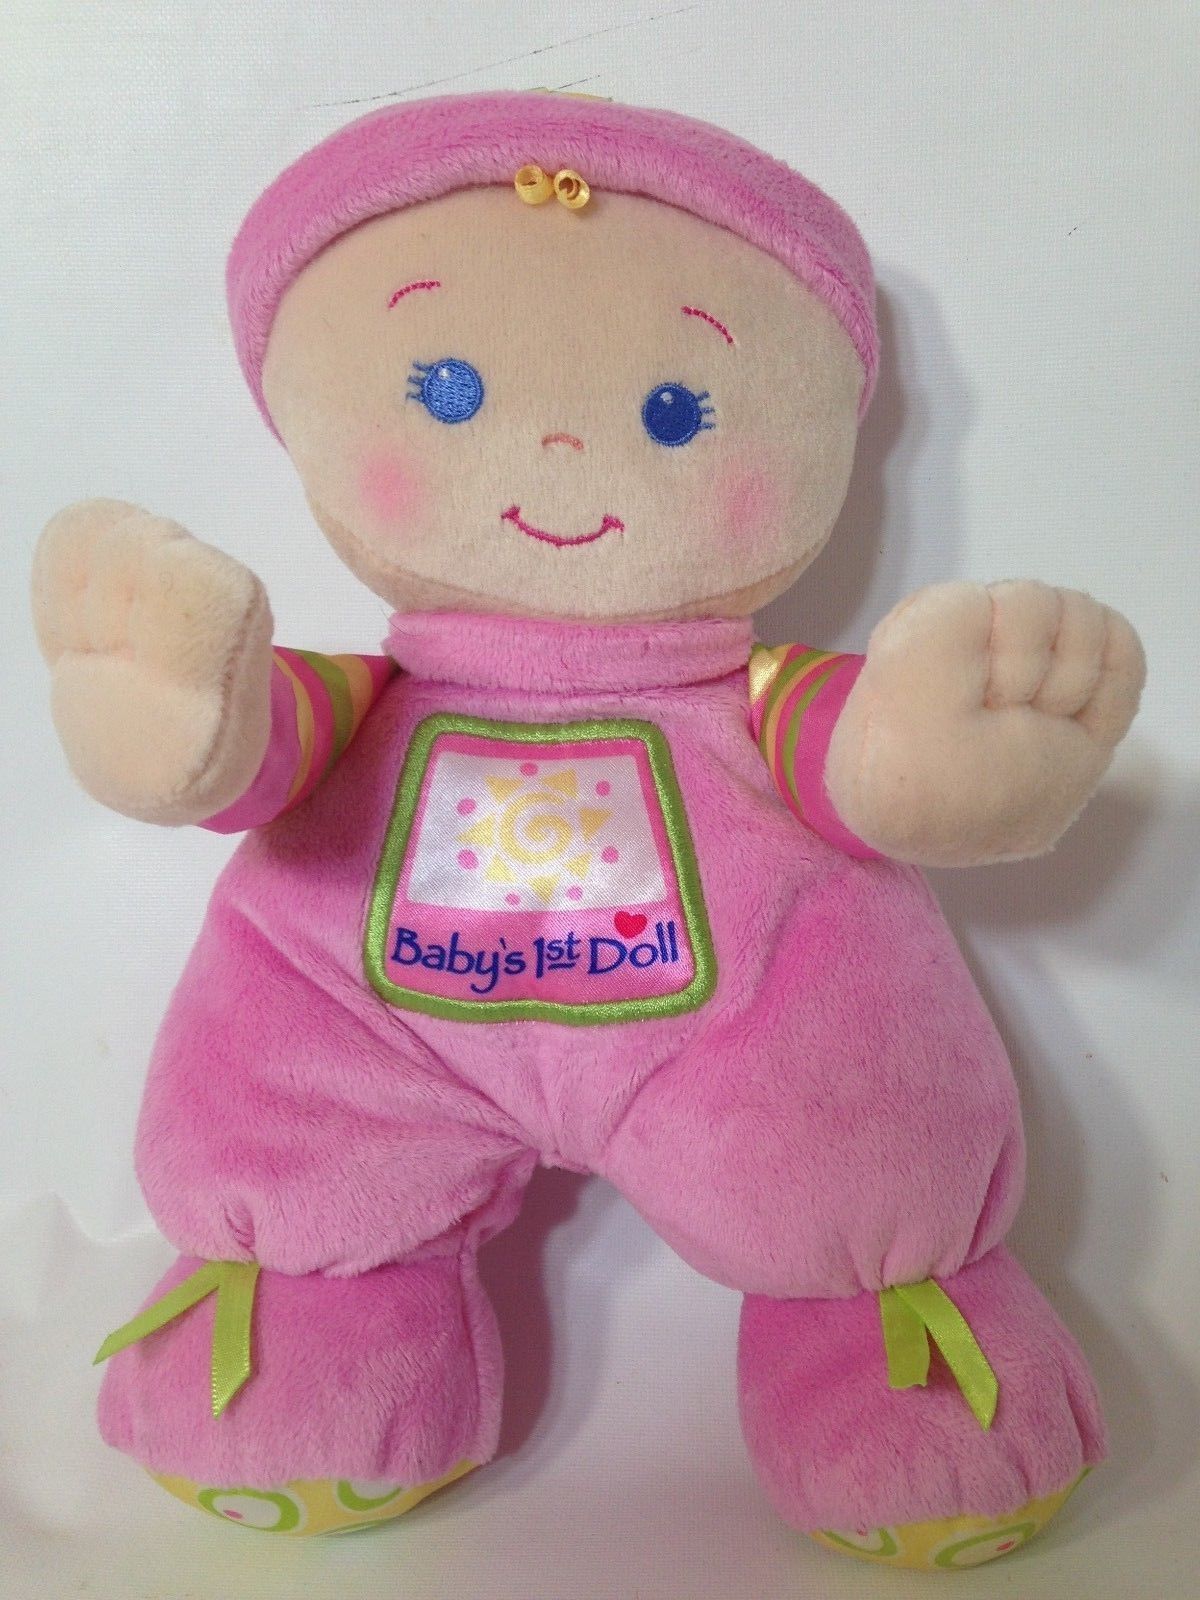 fisher price soft baby doll